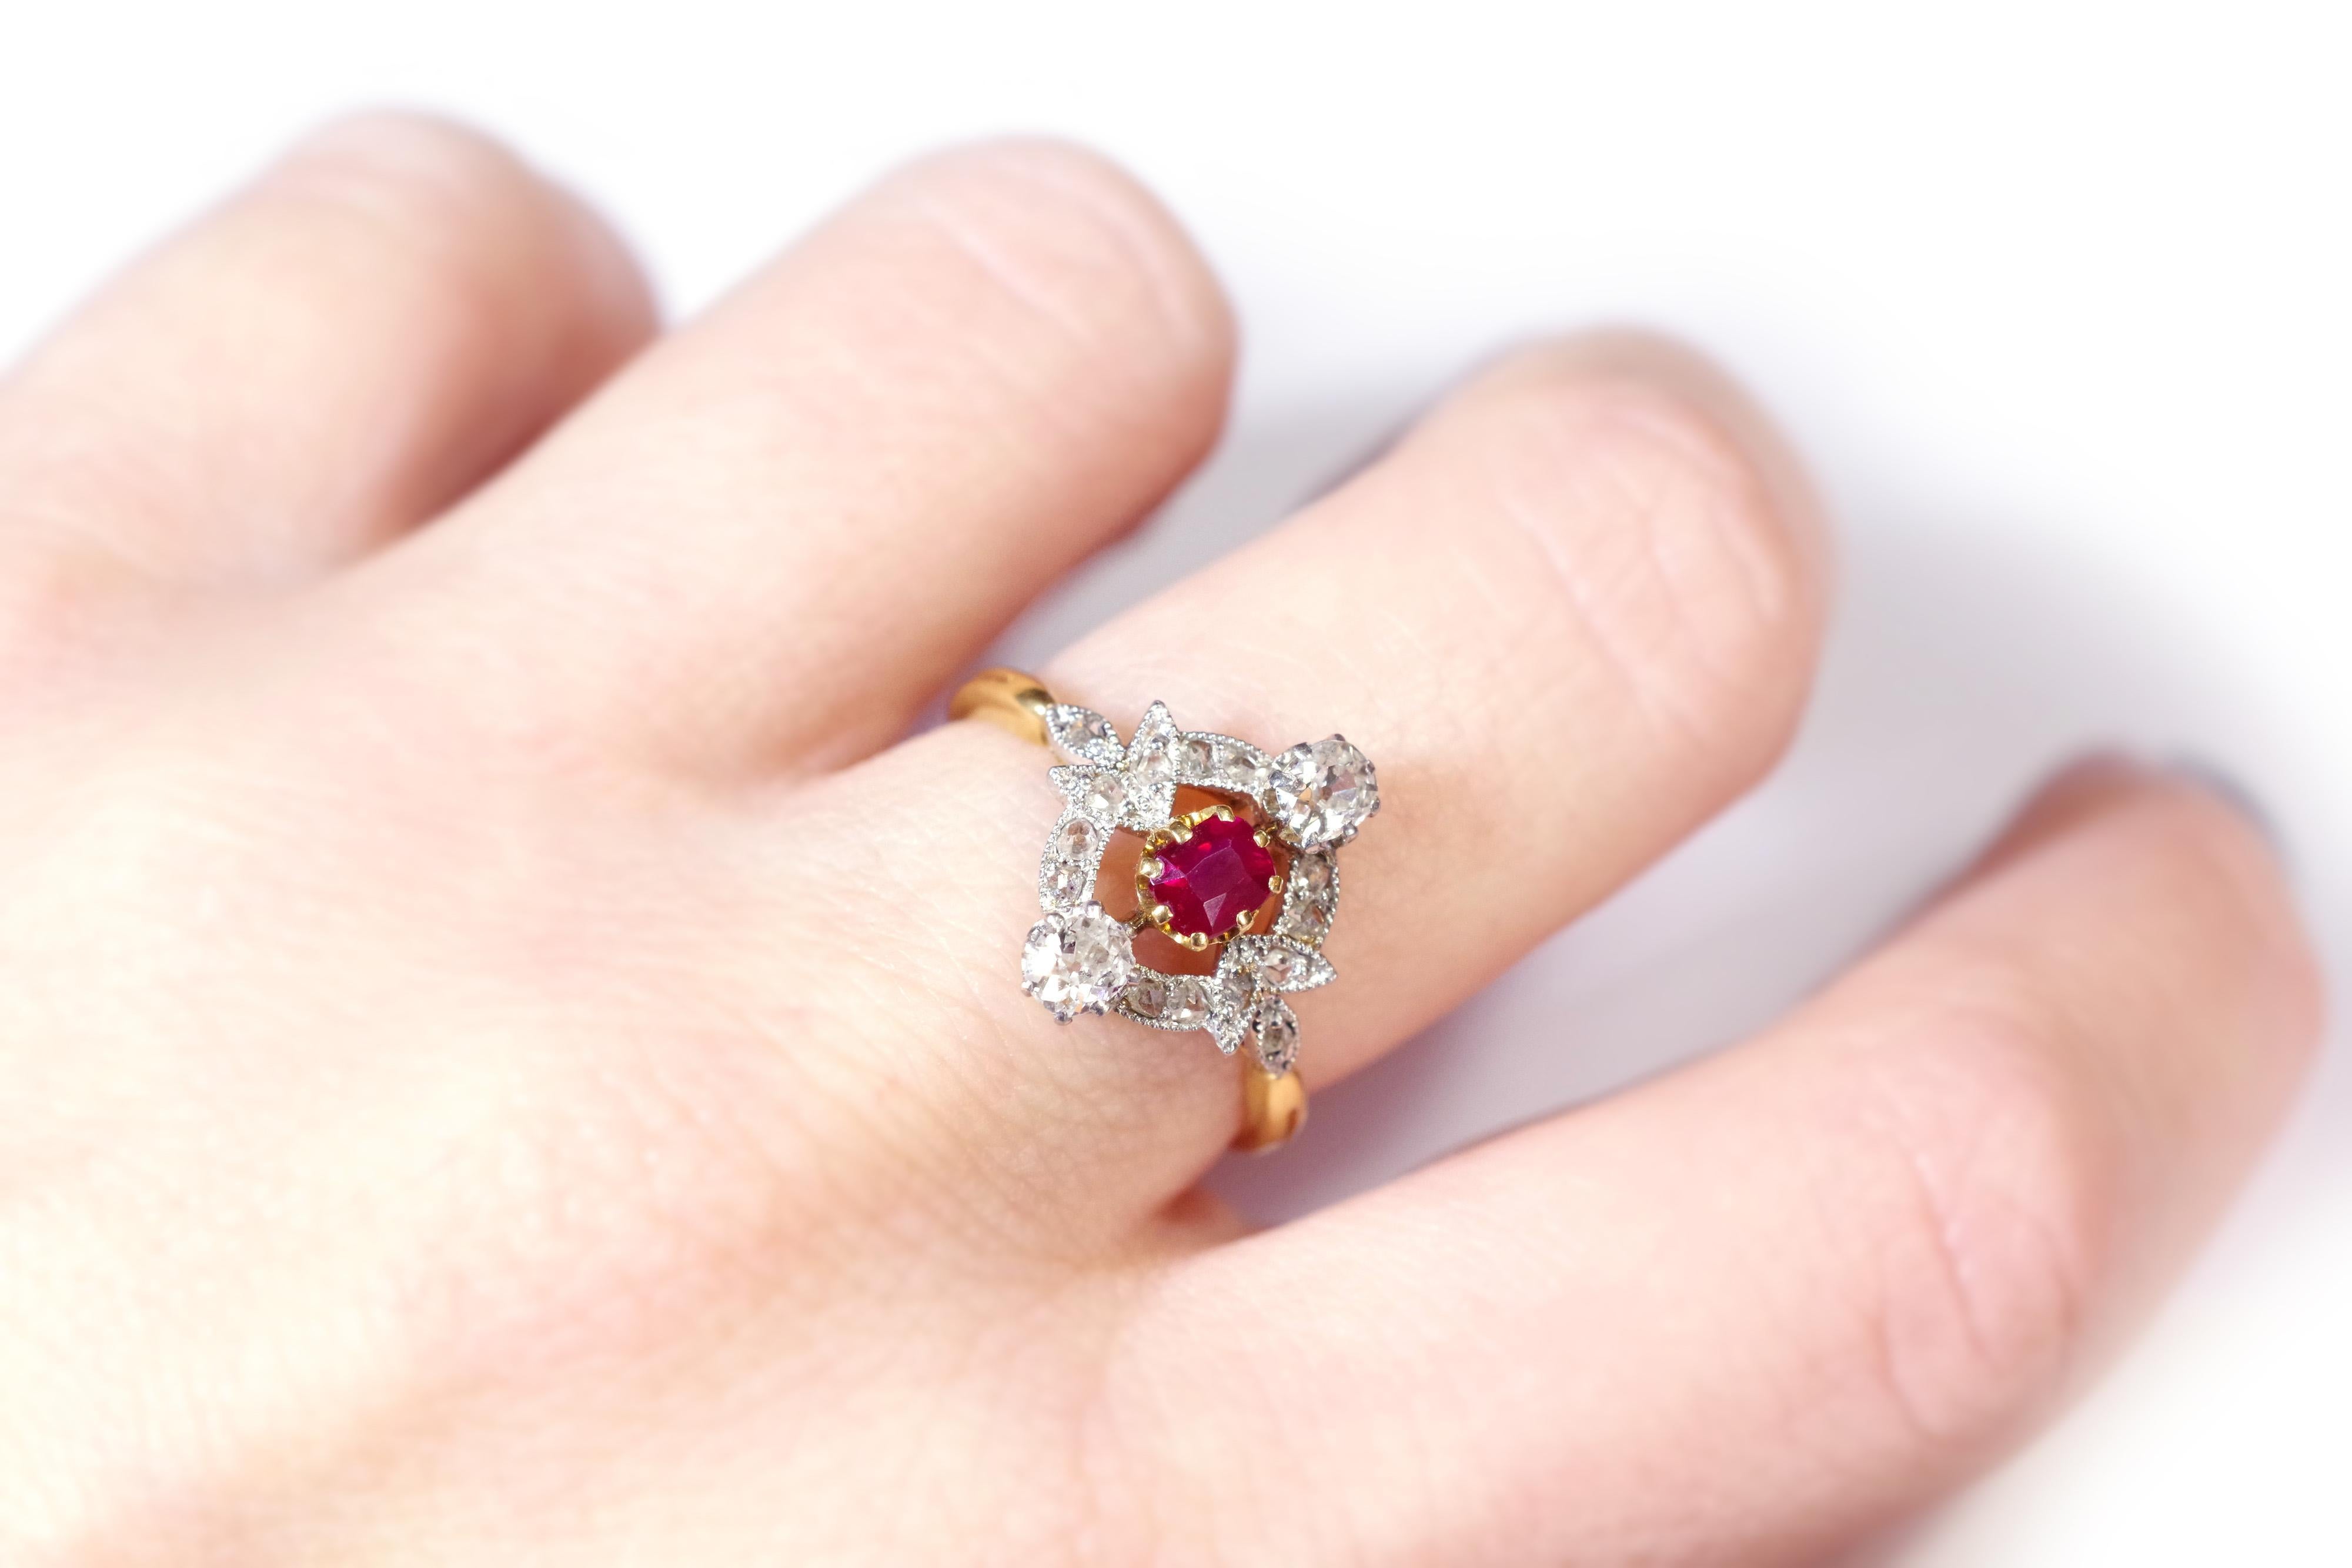 Art Nouveau ruby ring in 18 karat yellow gold and platinum. Antique ring of the Art Nouveau period decorated with a pigeon's blood ruby and diamonds. In its center there is a cushion-cut ruby. The ruby is framed by two old-cut diamonds. The whole is